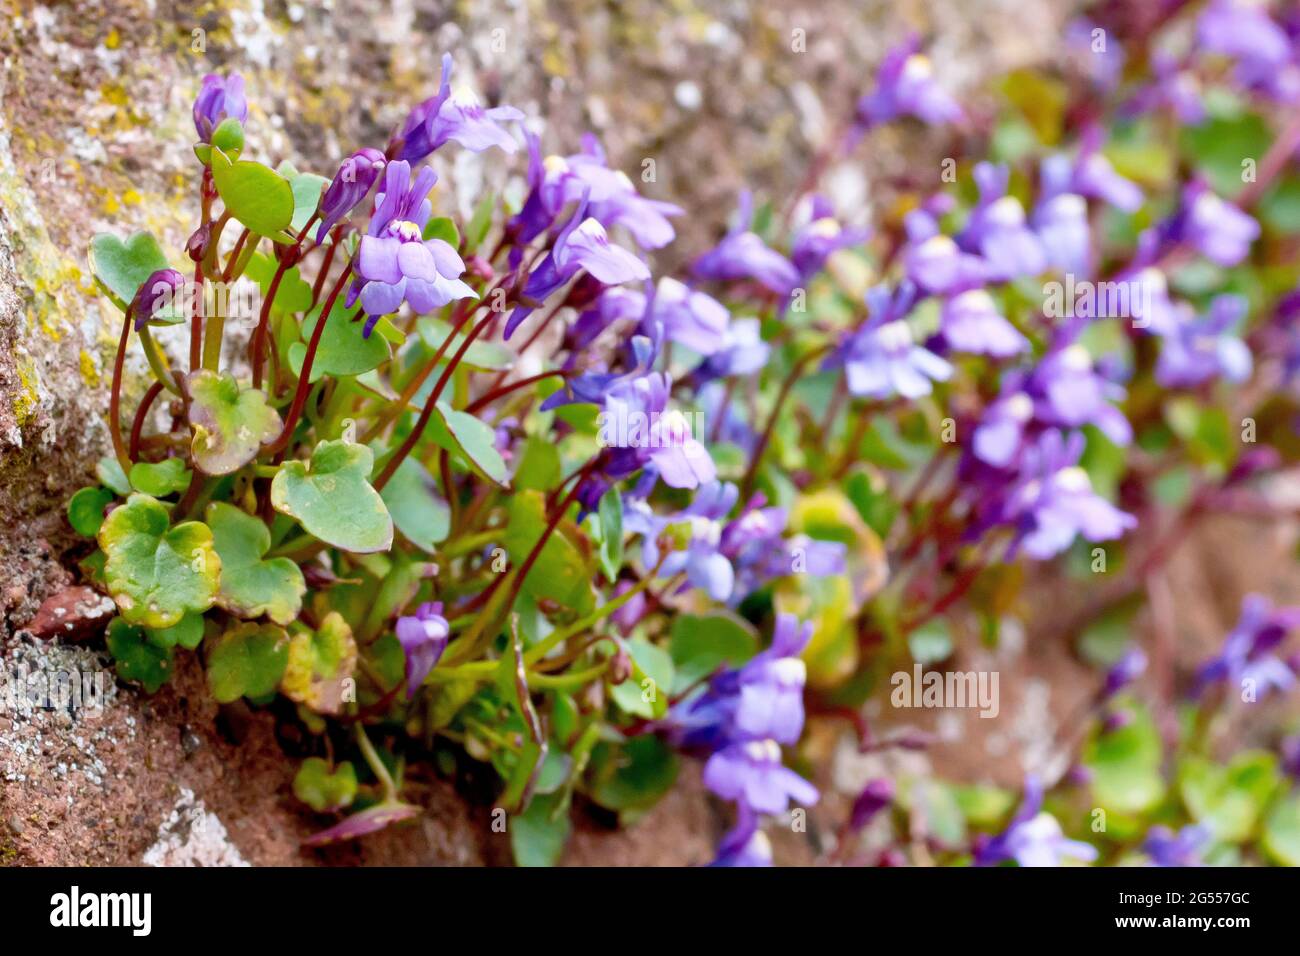 Ivy-leaved Toadflax (cymbalaria muralis), close up showng the plant growing along a crack in the mortar of a sandstone wall. Stock Photo